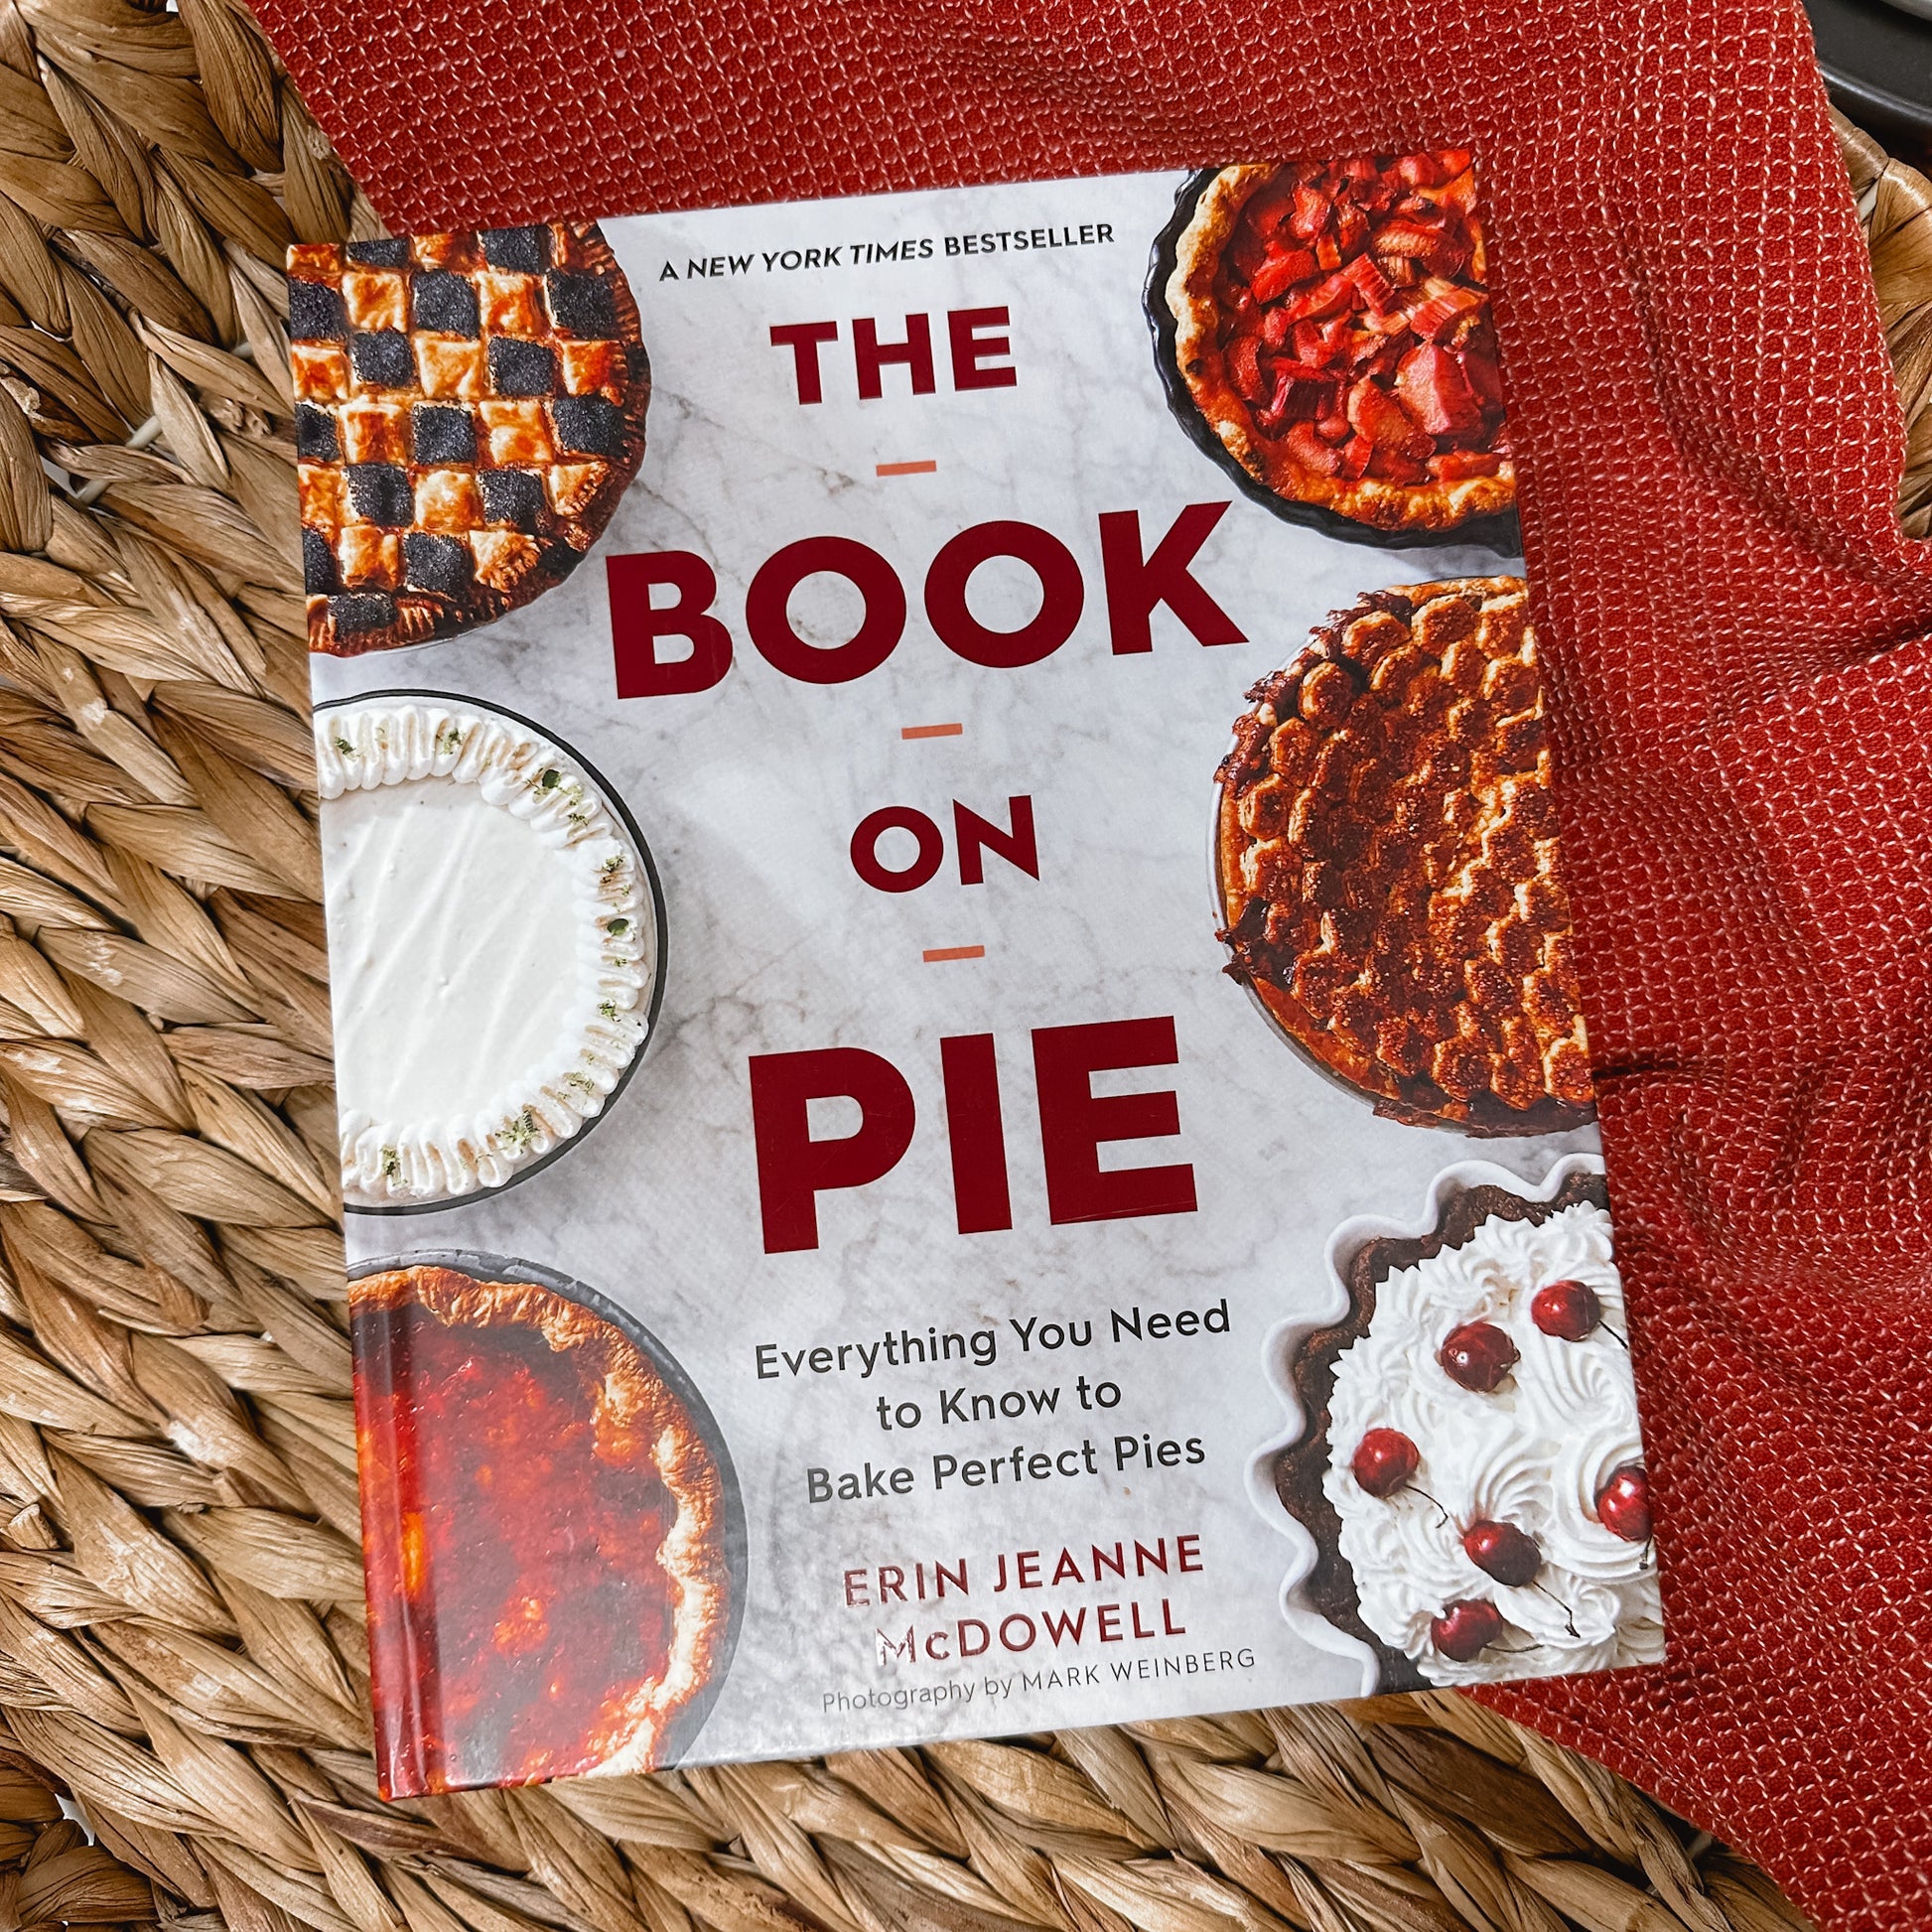 cover of The Book on Pie cookbook, everything you need to know to bake perfect pies by erin jeanne mcdowell in a basket with a red colored kitchen towel.